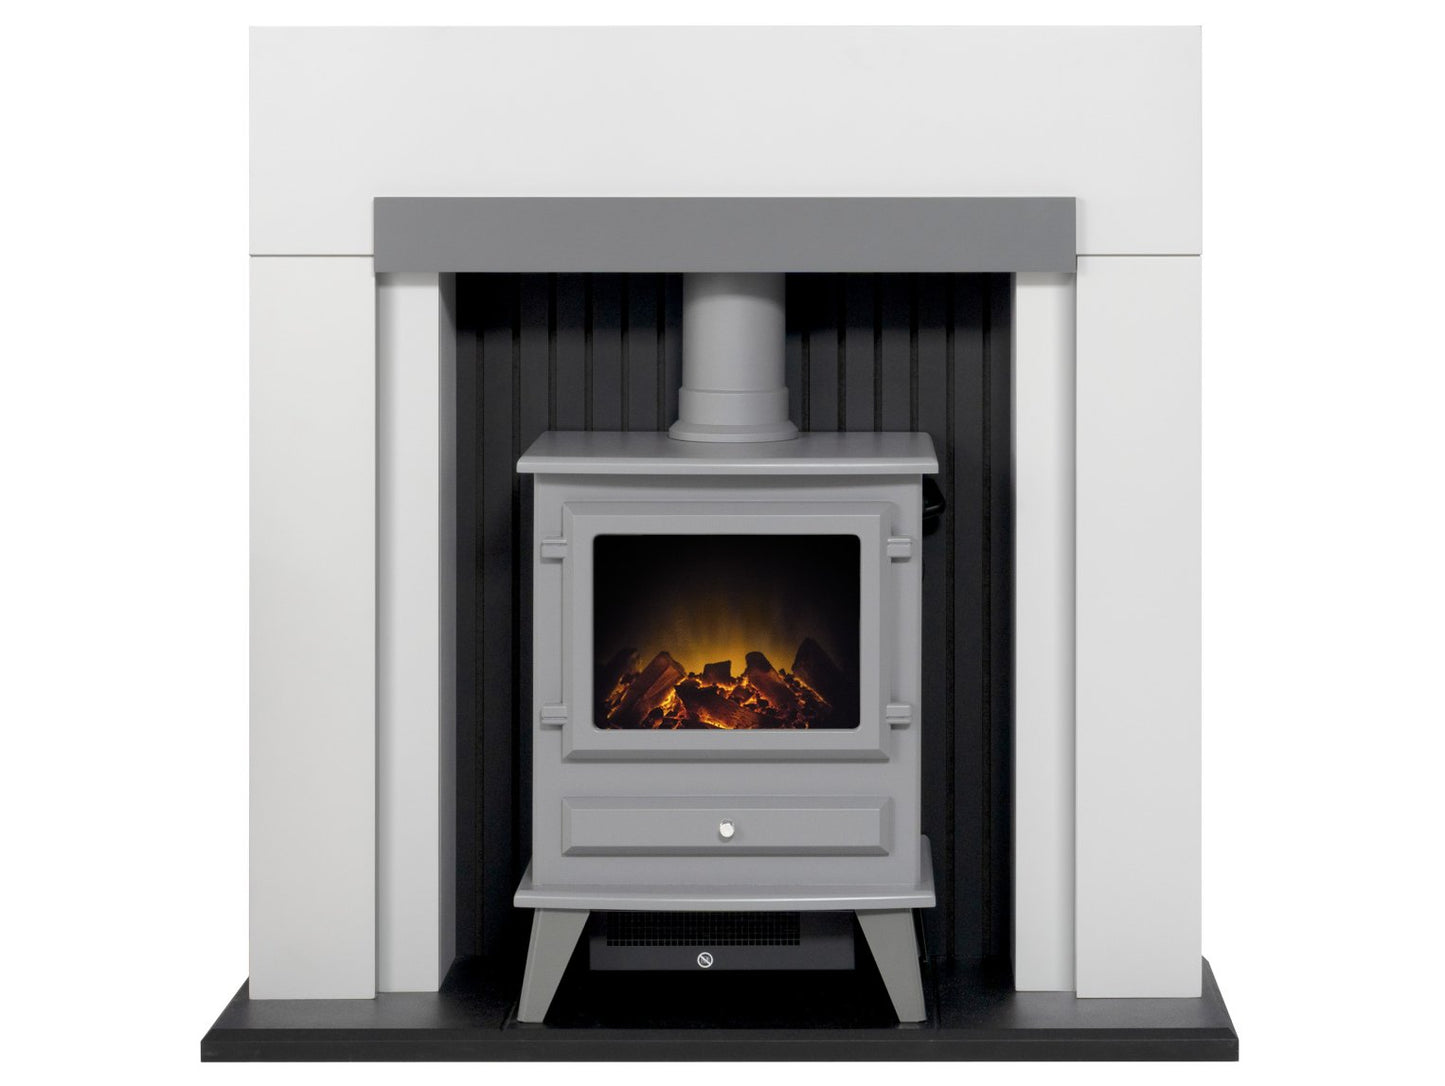 Adam Salzburg in Pure White & Grey with Hudson Electric Stove in Grey, 39 Inch